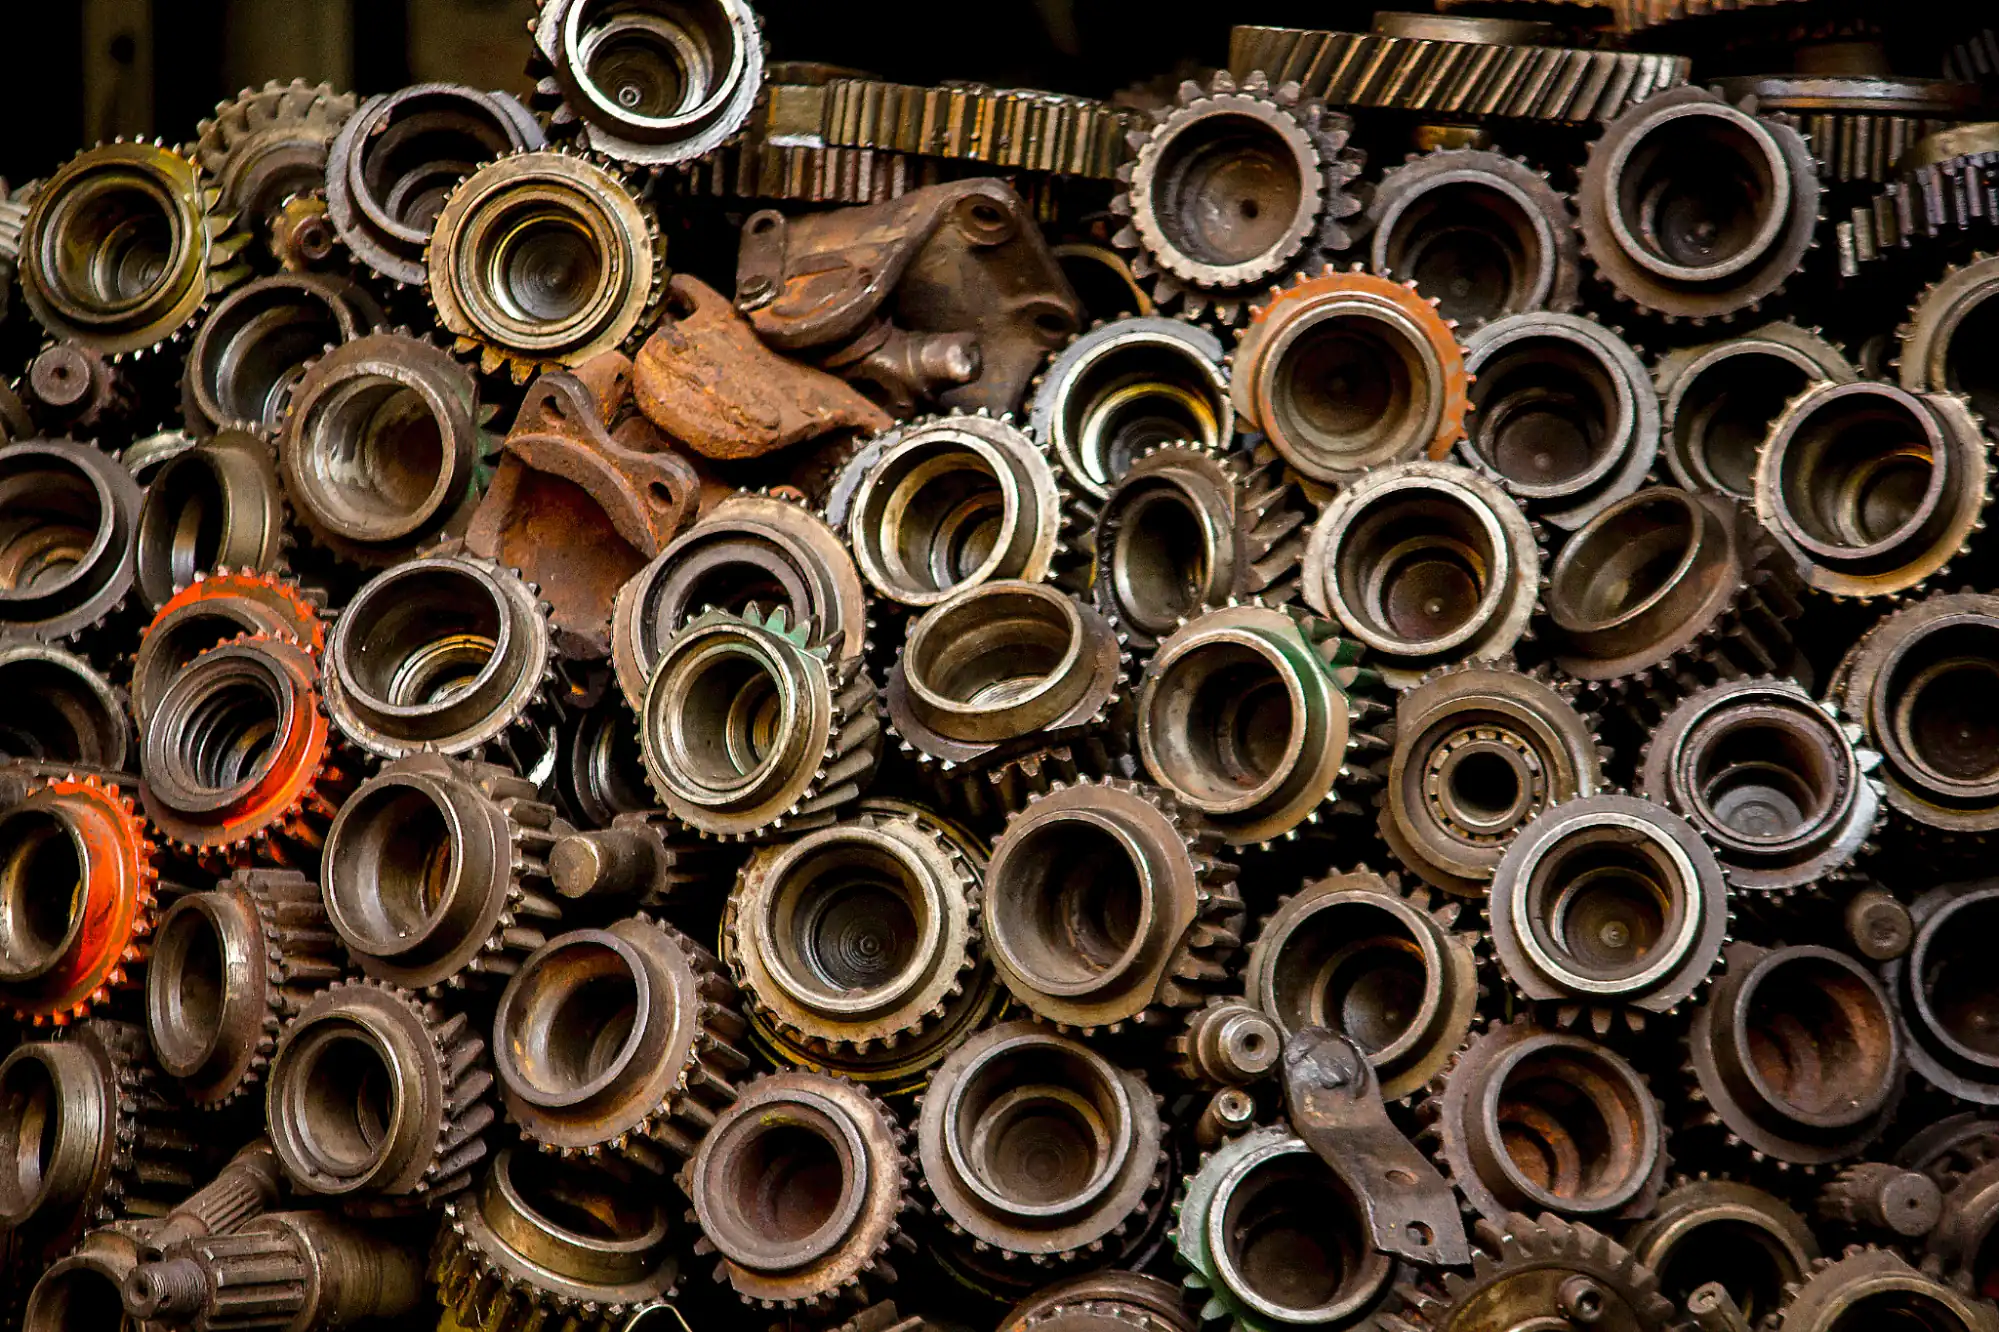 A large pile of gears and other parts